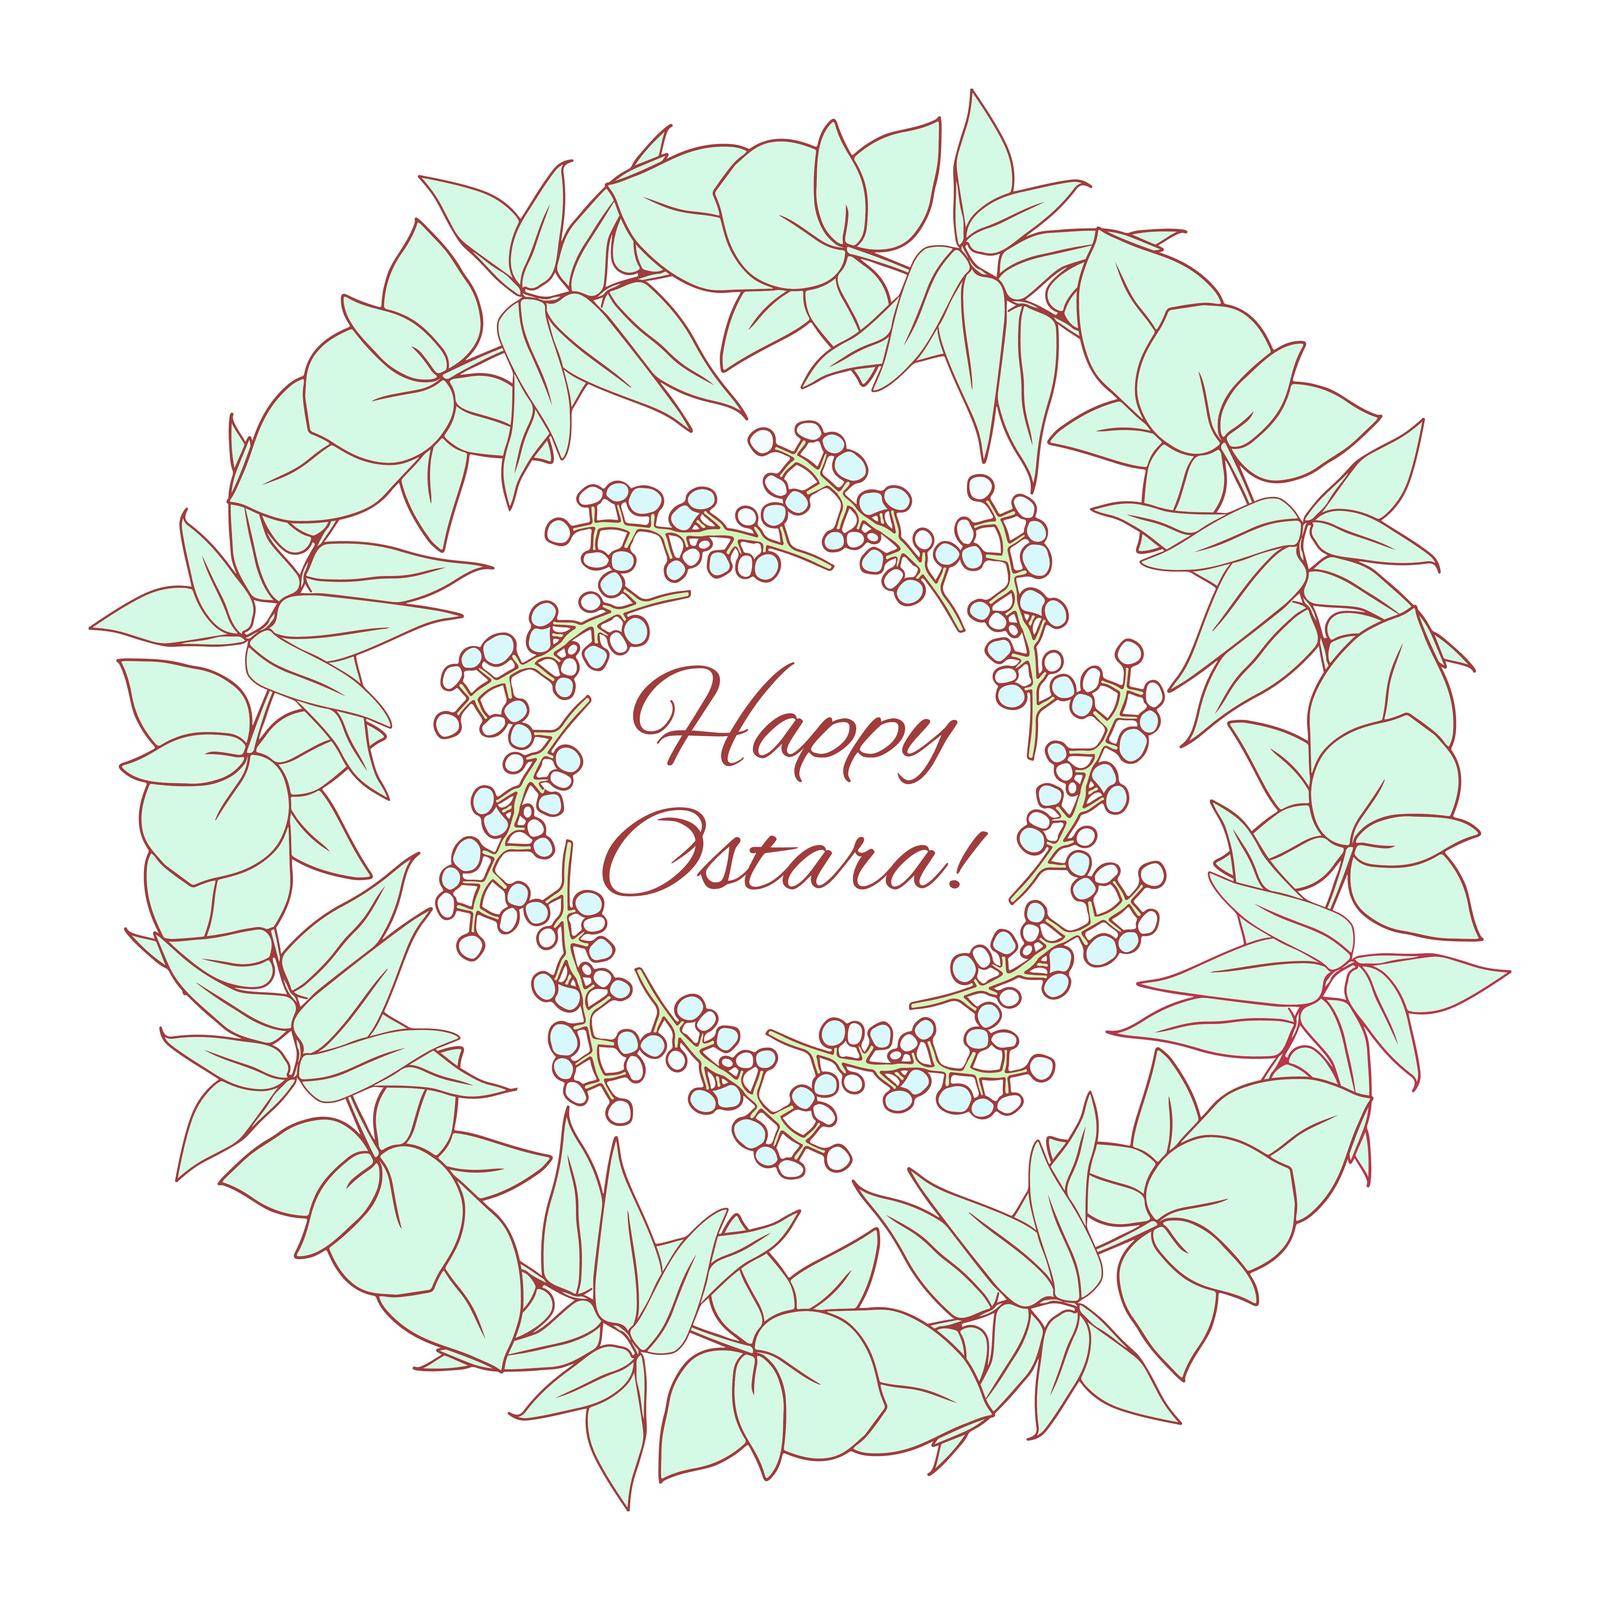 Pagan Festival Ostara greeting card. Vector frame design in soft pastel colors with lettering Blessed and happy Ostara.